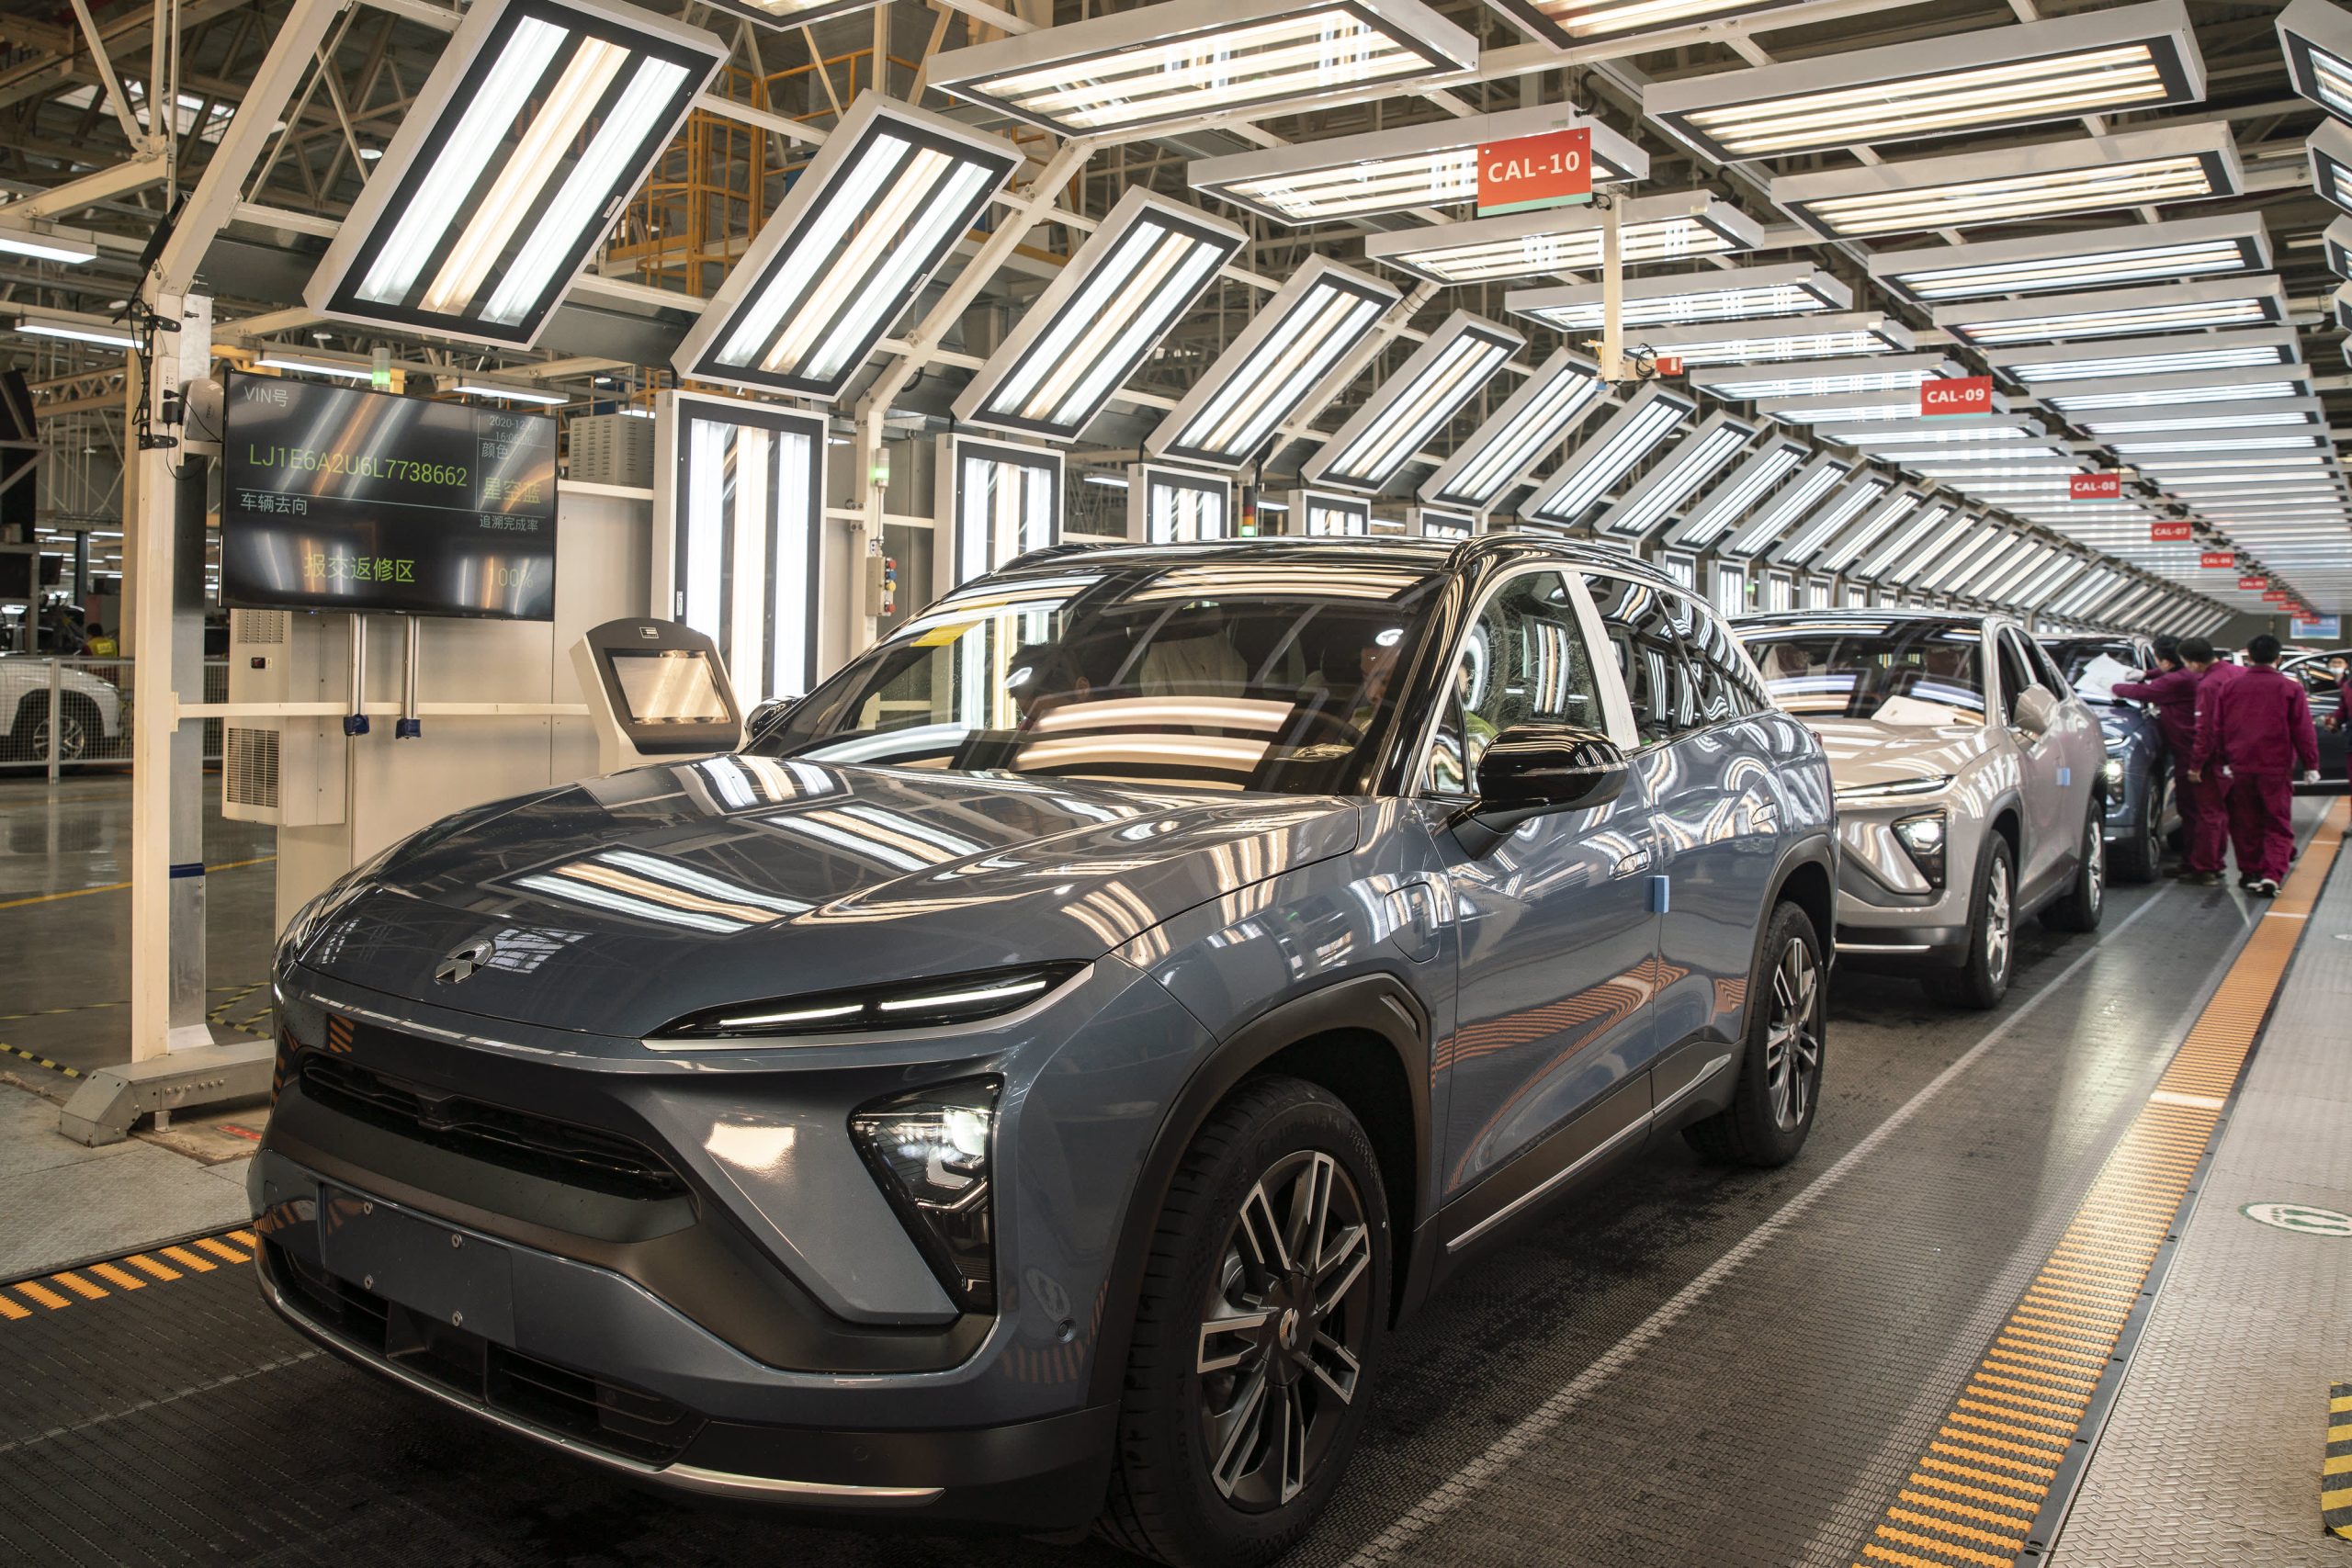 Tesla China rival Nio saw May deliveries impacted by global chip